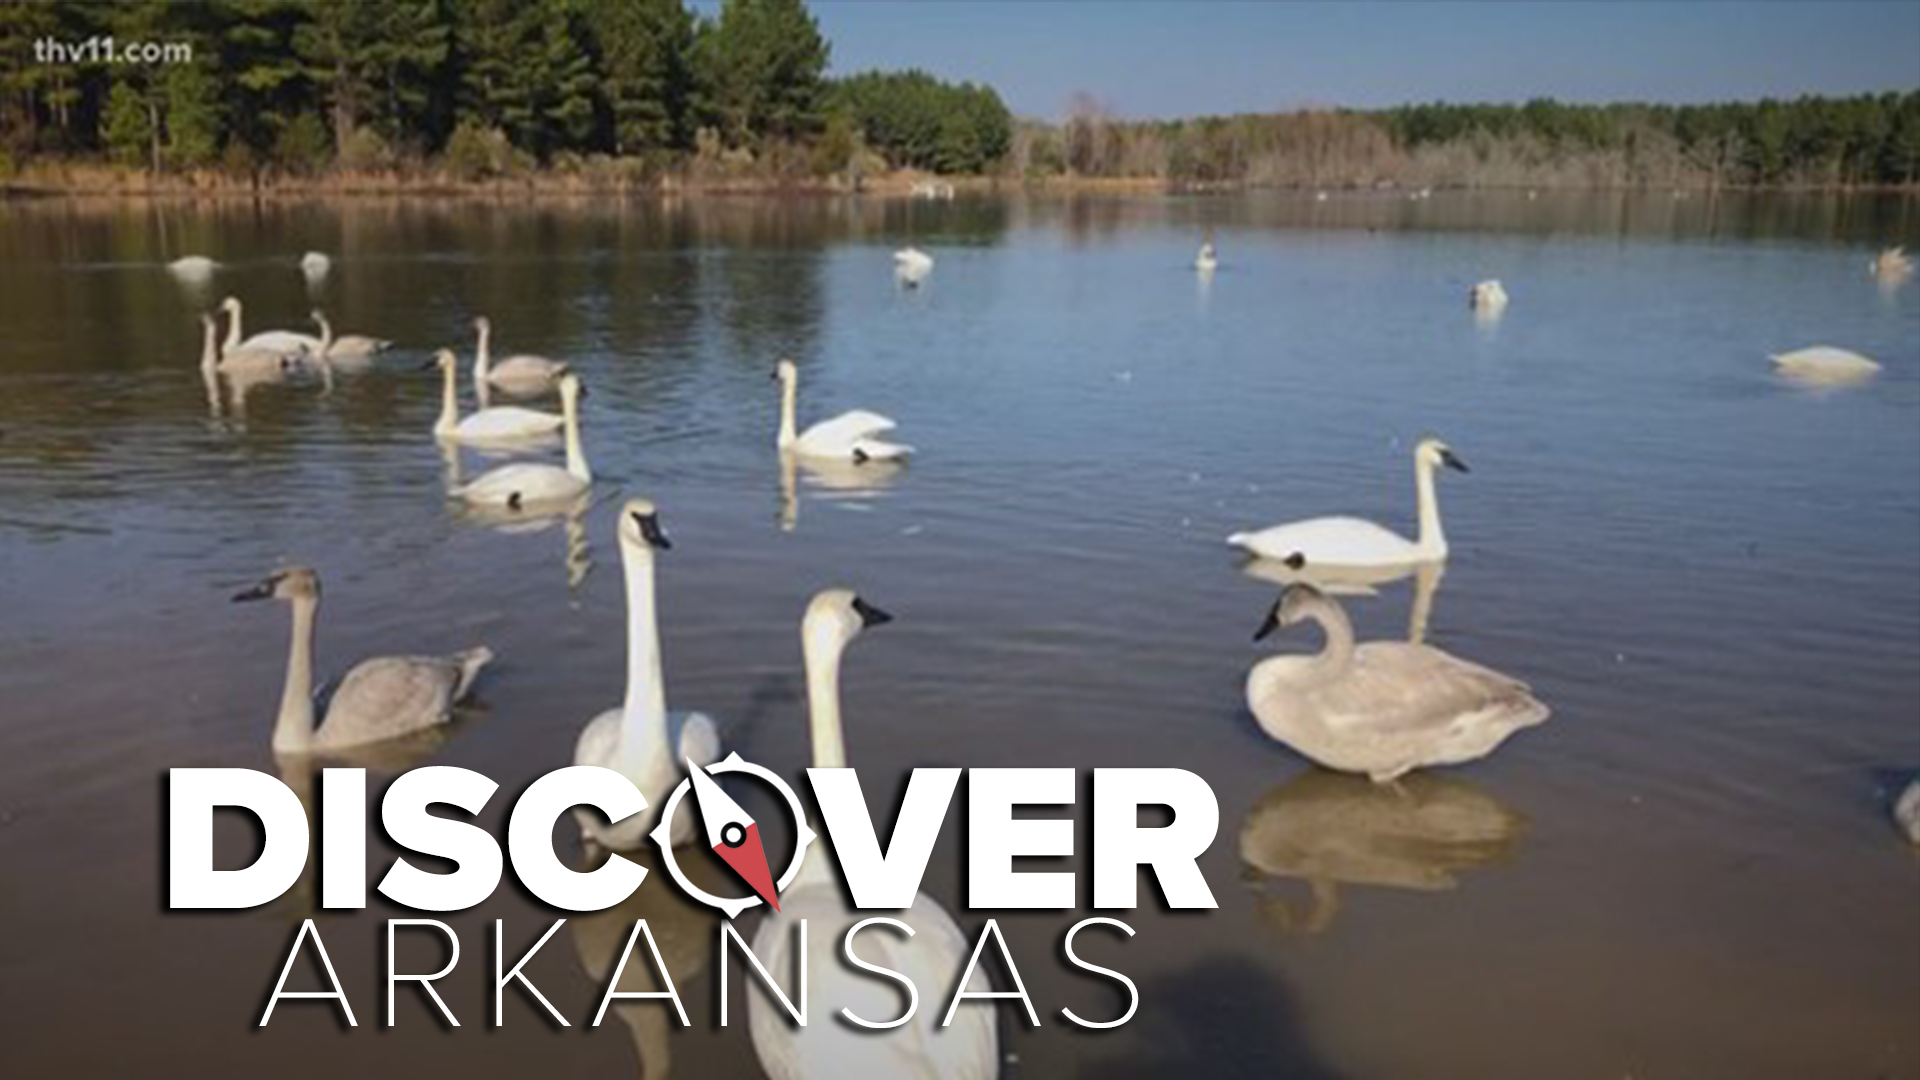 This week in Discover Arkansas, Ashley King travels to Magness Lake near Heber Springs.